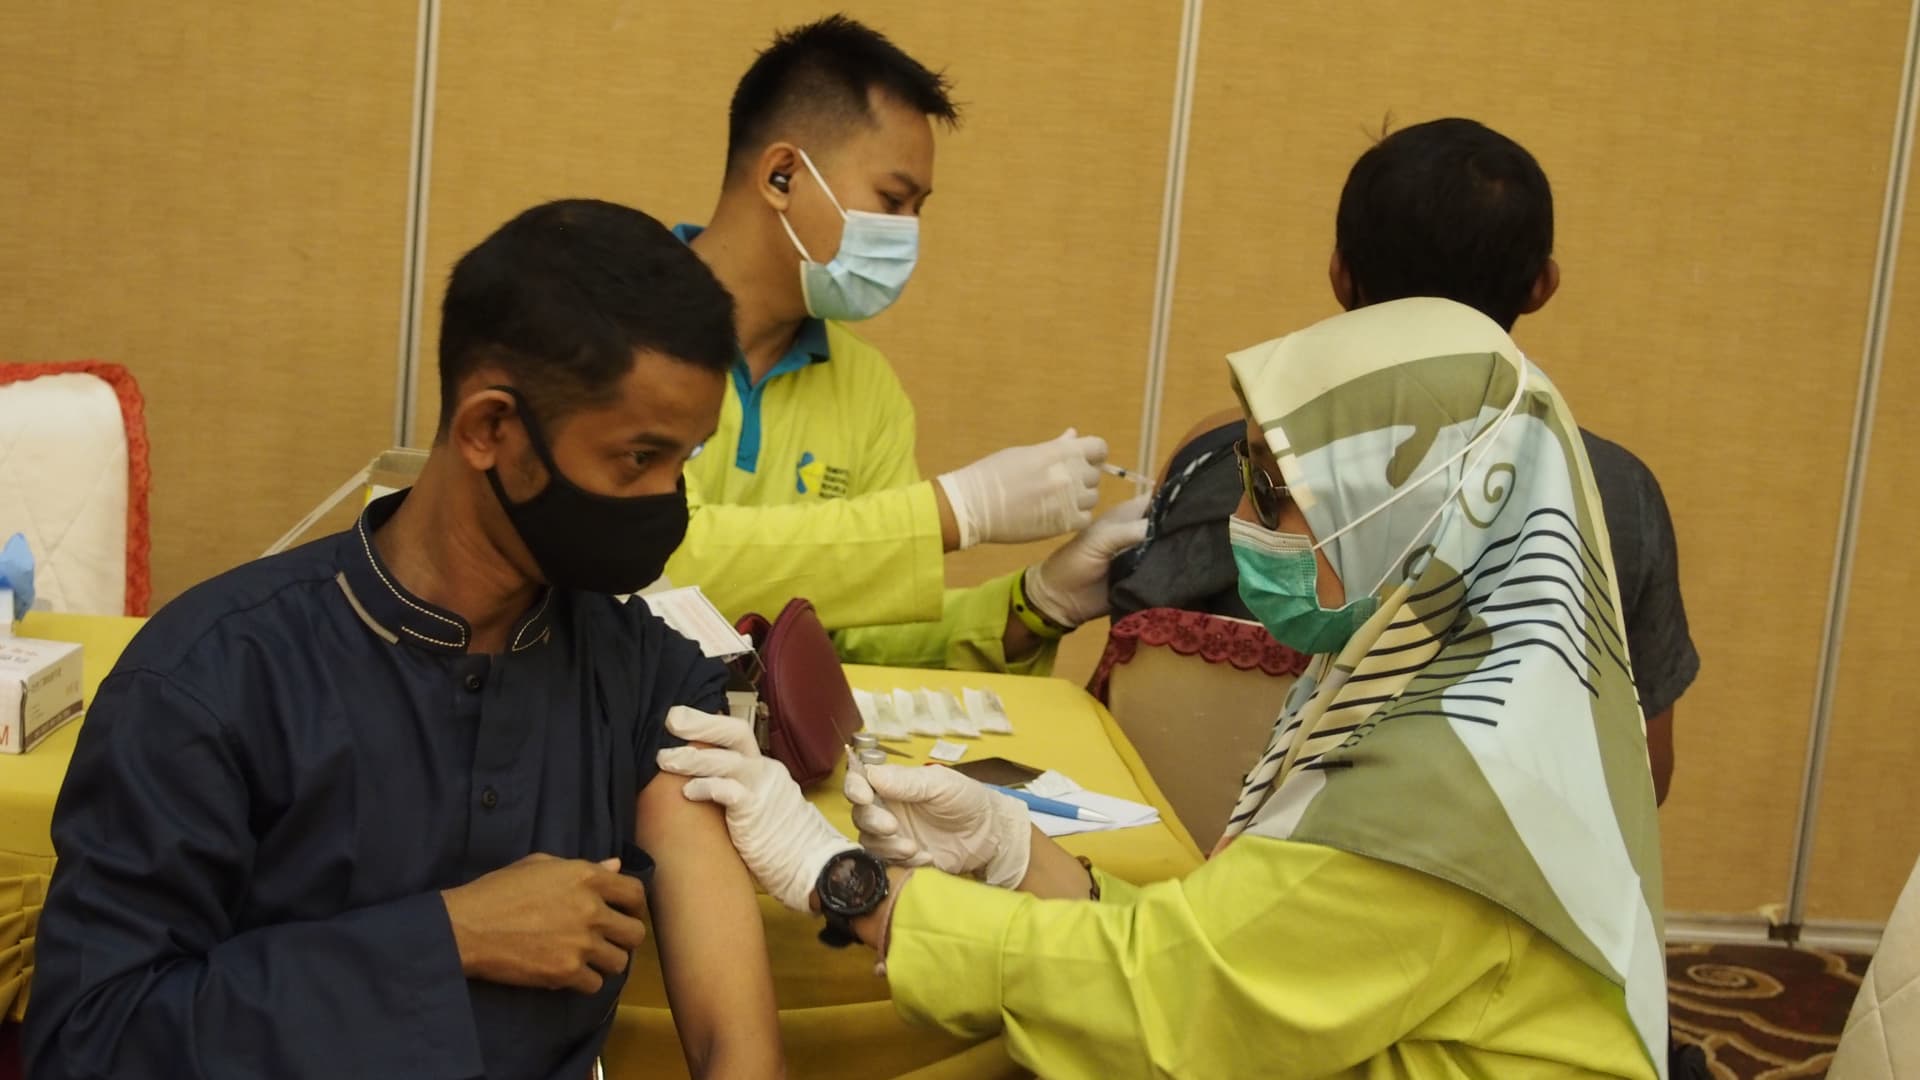 India emerged as a large supplier of Covid-19 vaccines, supplying to 75 countries, including Indonesia, where a medical officer injects the vaccine AstraZeneca into a recipient in Bintan island on July 2, 2021.